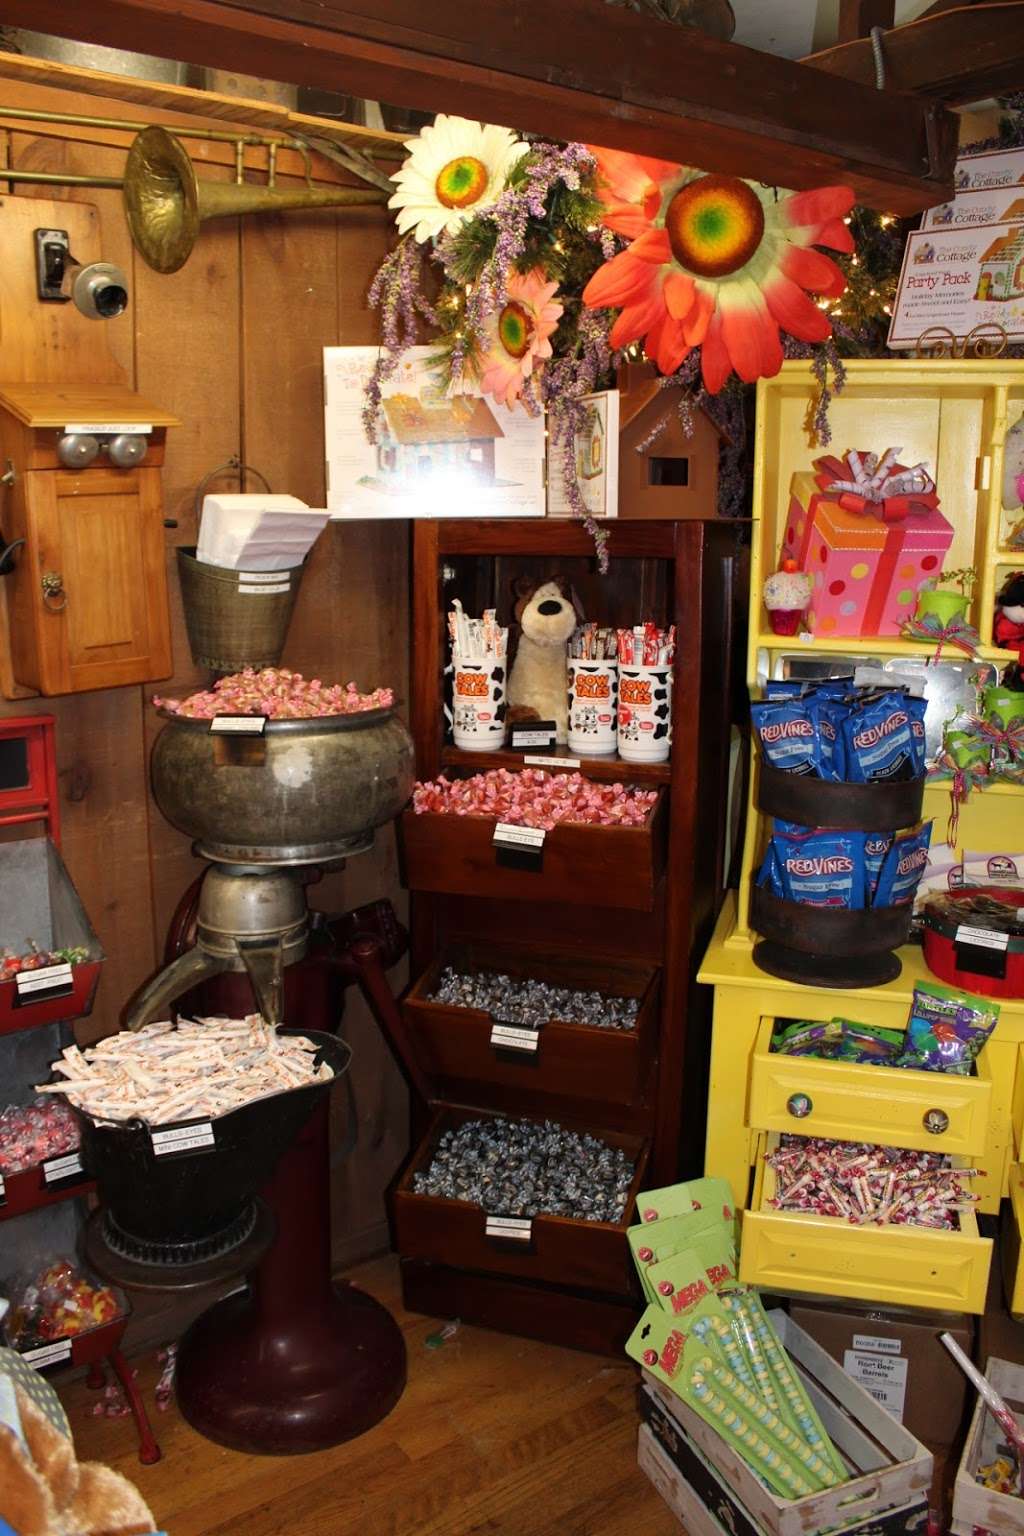 Ma & Pas Candy | 420 Robert Parker Coffin Rd, Long Grove, IL 60047, USA | Phone: (847) 634-0450